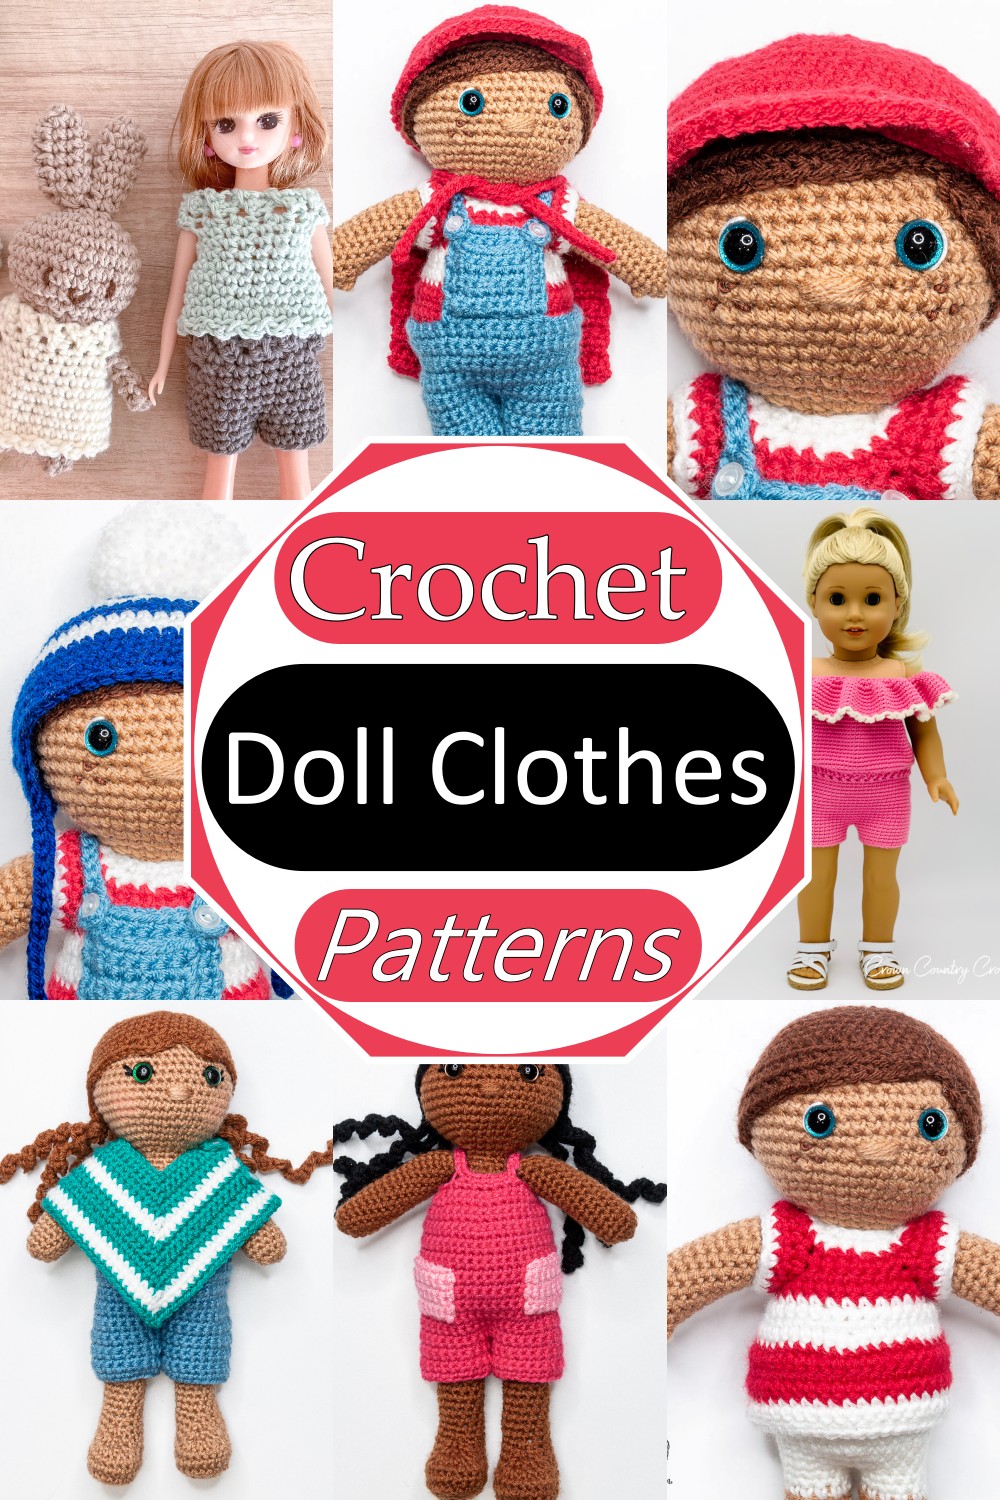 Crochet Doll Clothes Patterns 1